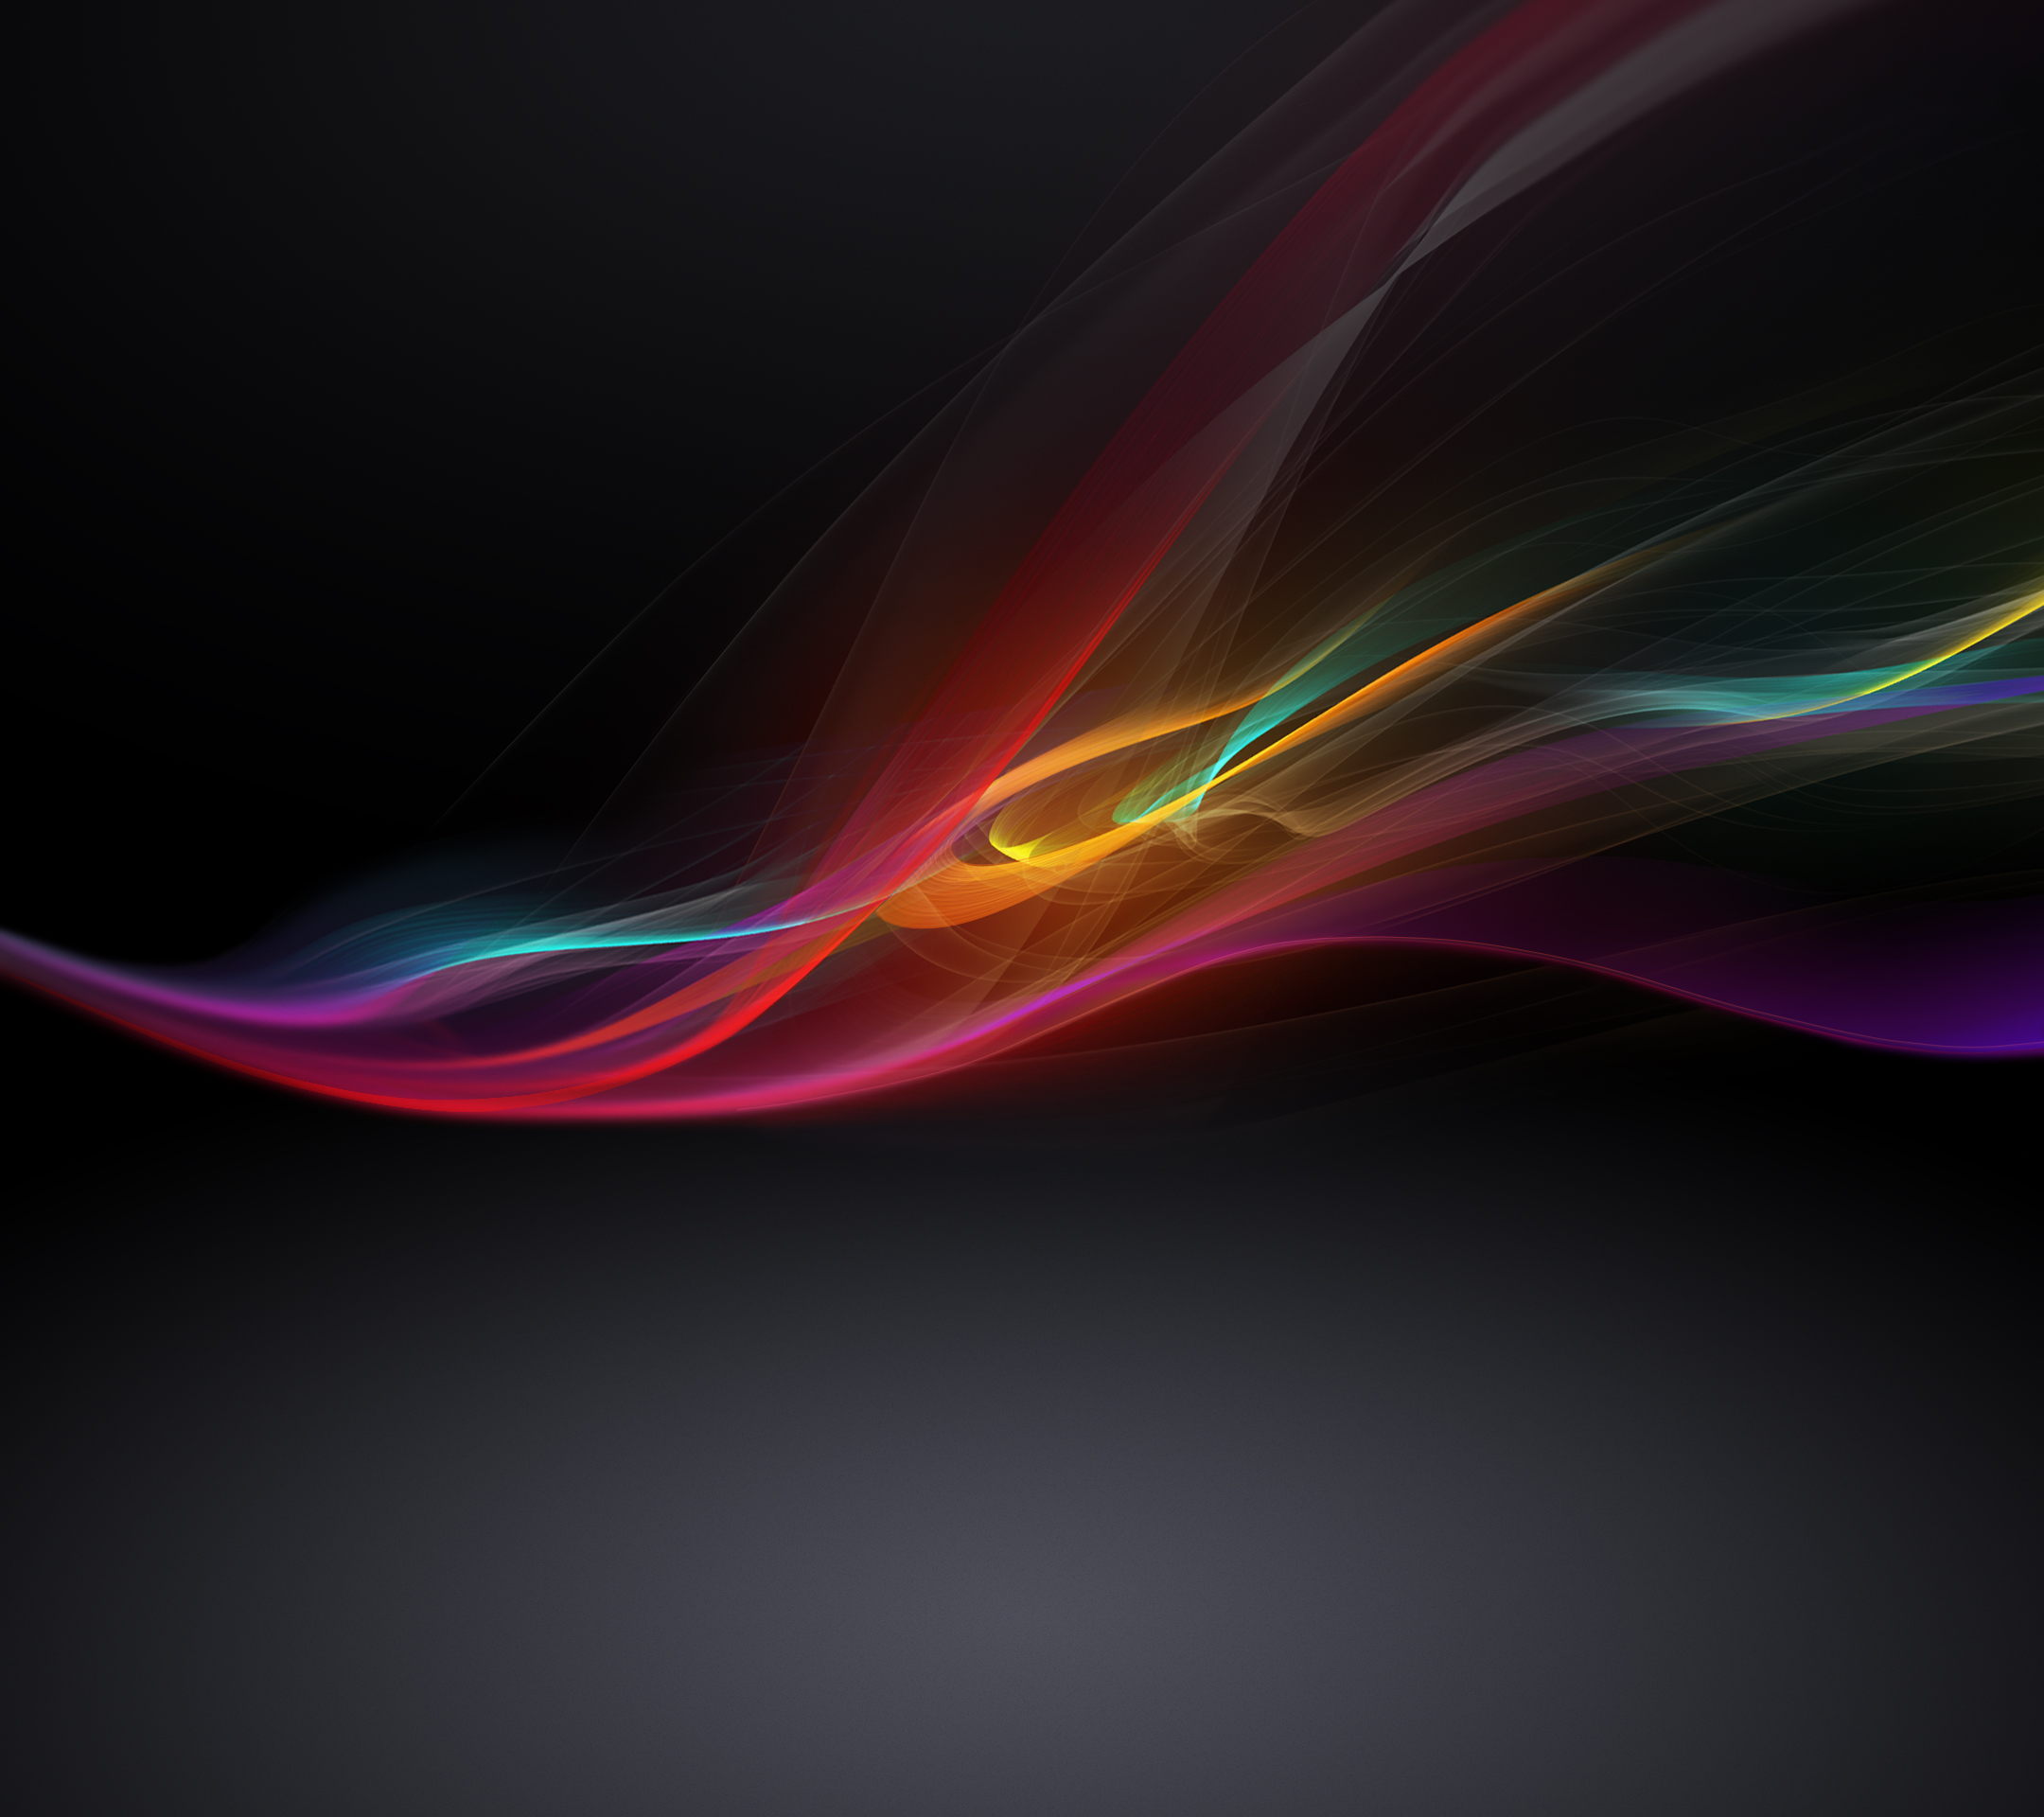 motley, abstract, multicolored, wavy, curve Full HD